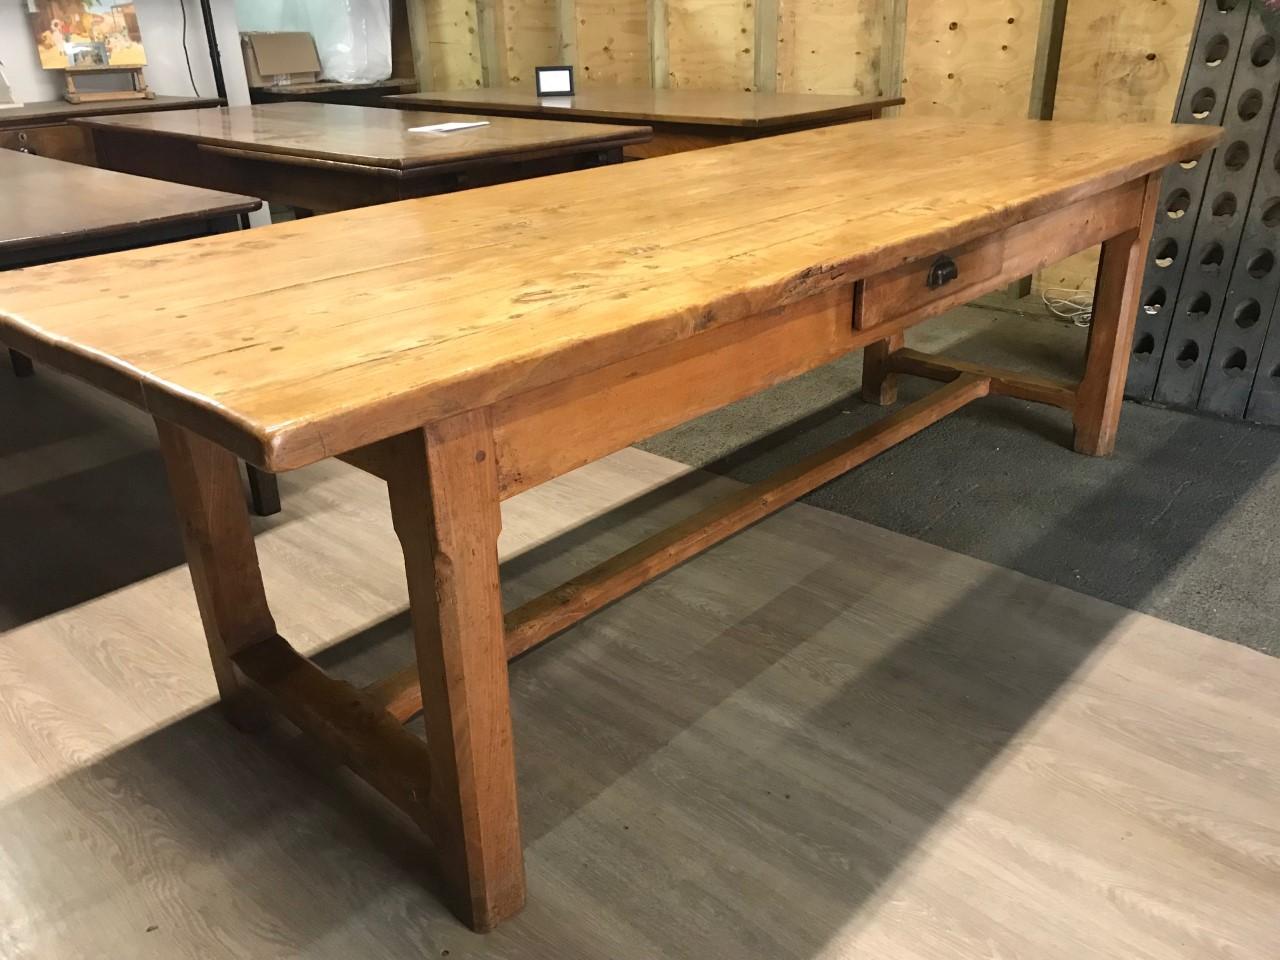 Large Pale elm French farmhouse table with drawer and centre stretcher. Gorgeous color and patination. The table stands on square legs supported by stretcher. Great overhang on each end and ample leg room. This table will seat 10 people